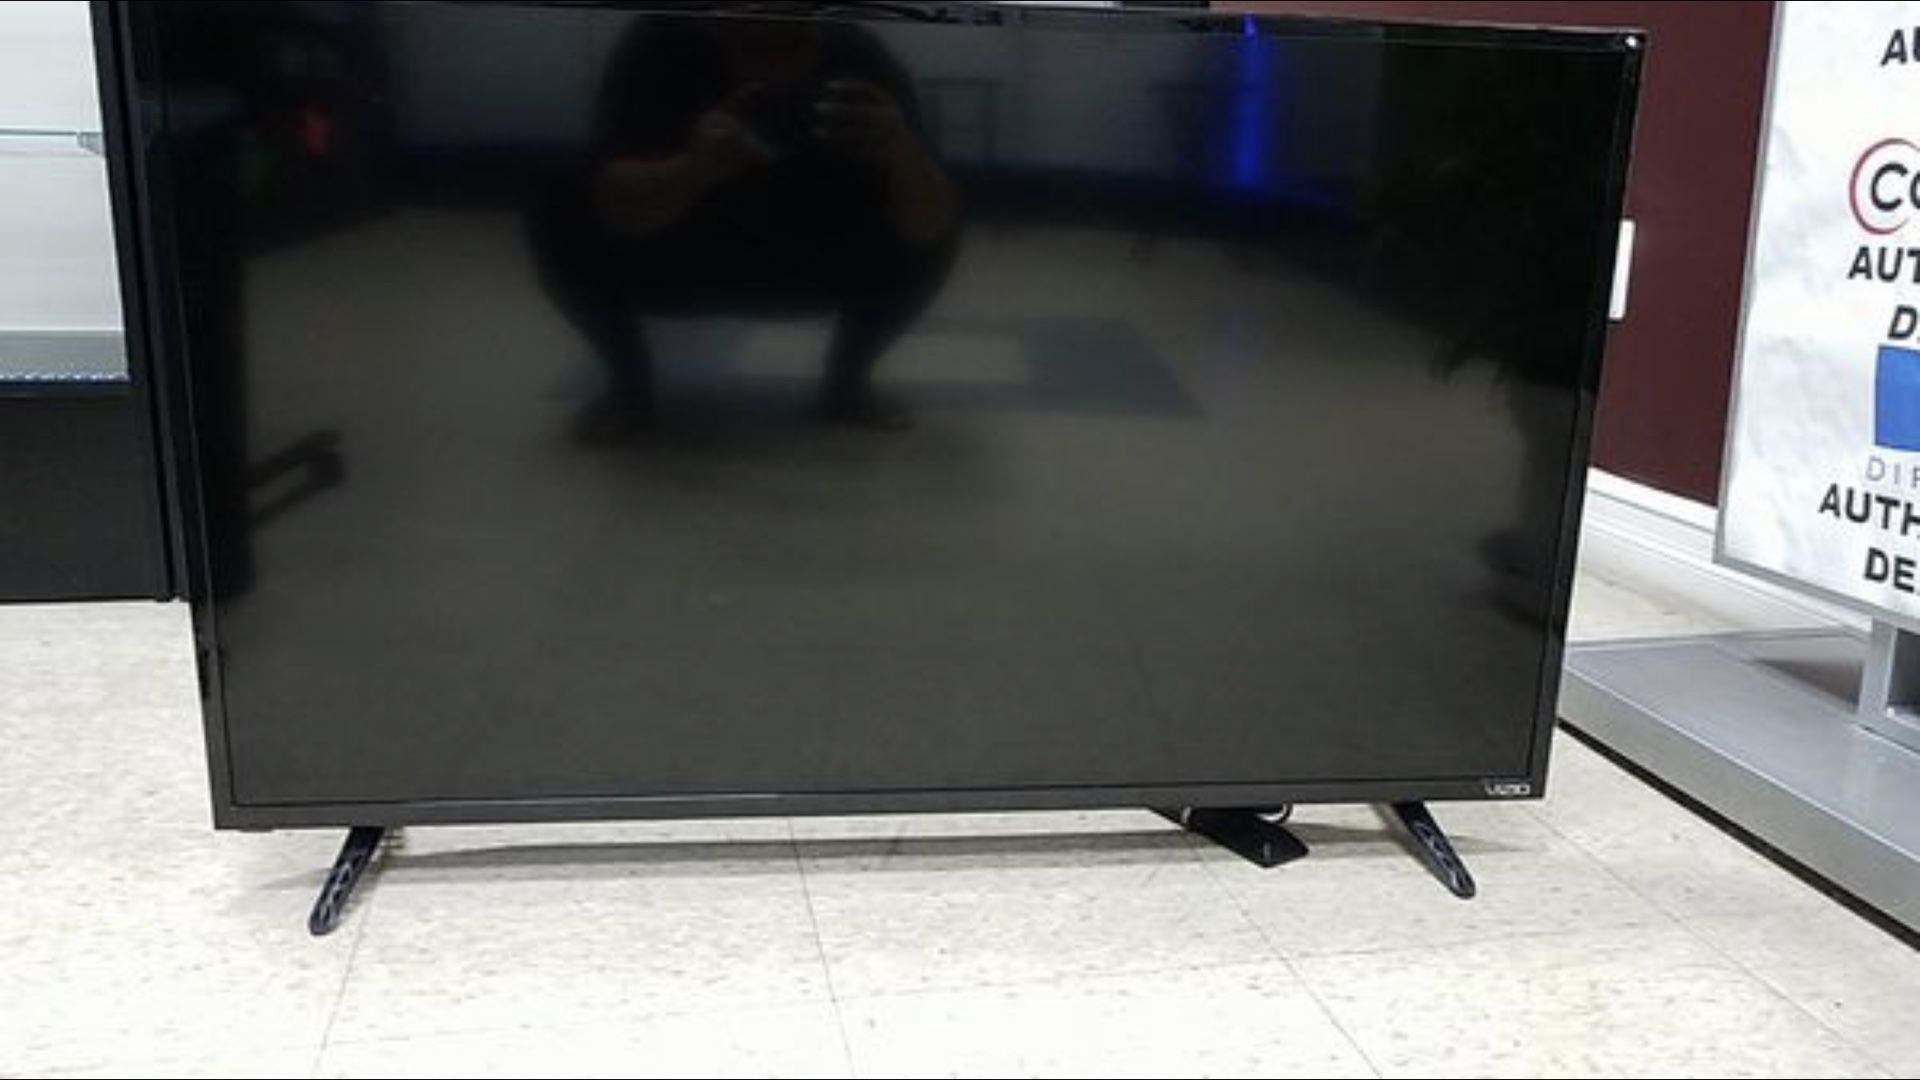 Vizio 42 in Smart TV brand new with out box display item